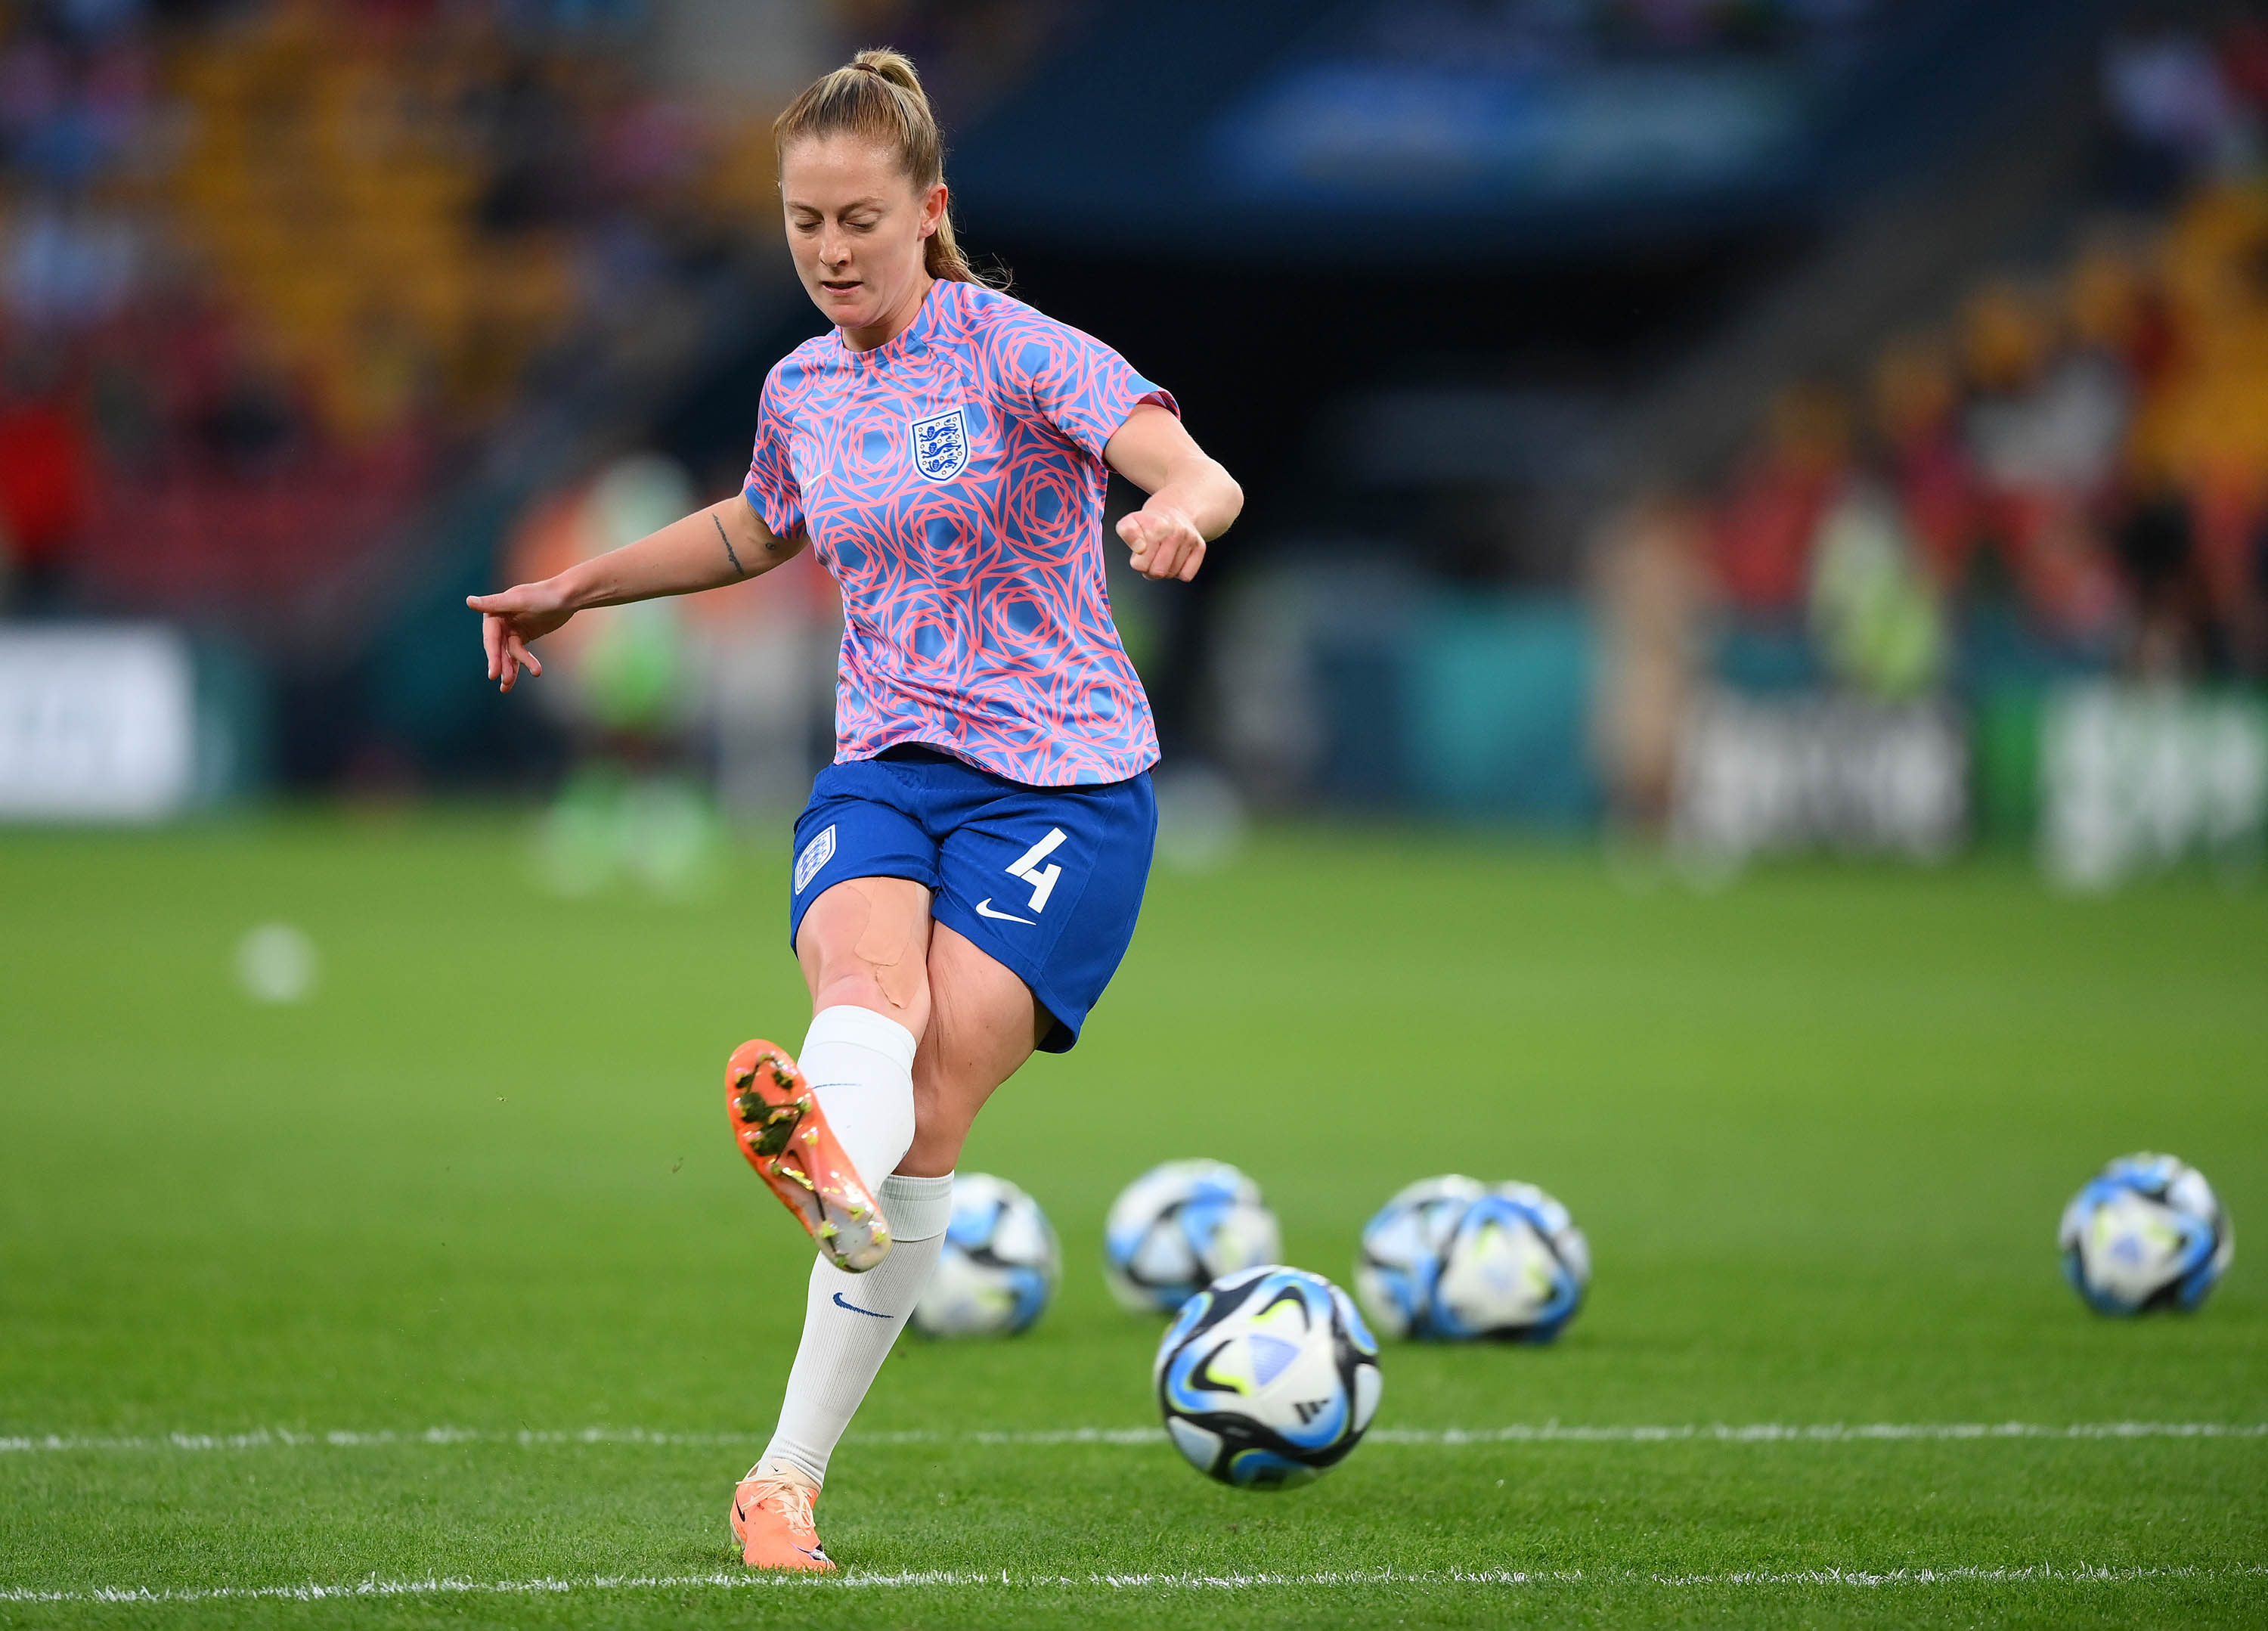 England's Keira Walsh warms up prior to the match between England and Nigeria at Brisbane Stadium in Brisbane, Australia, on August 7.